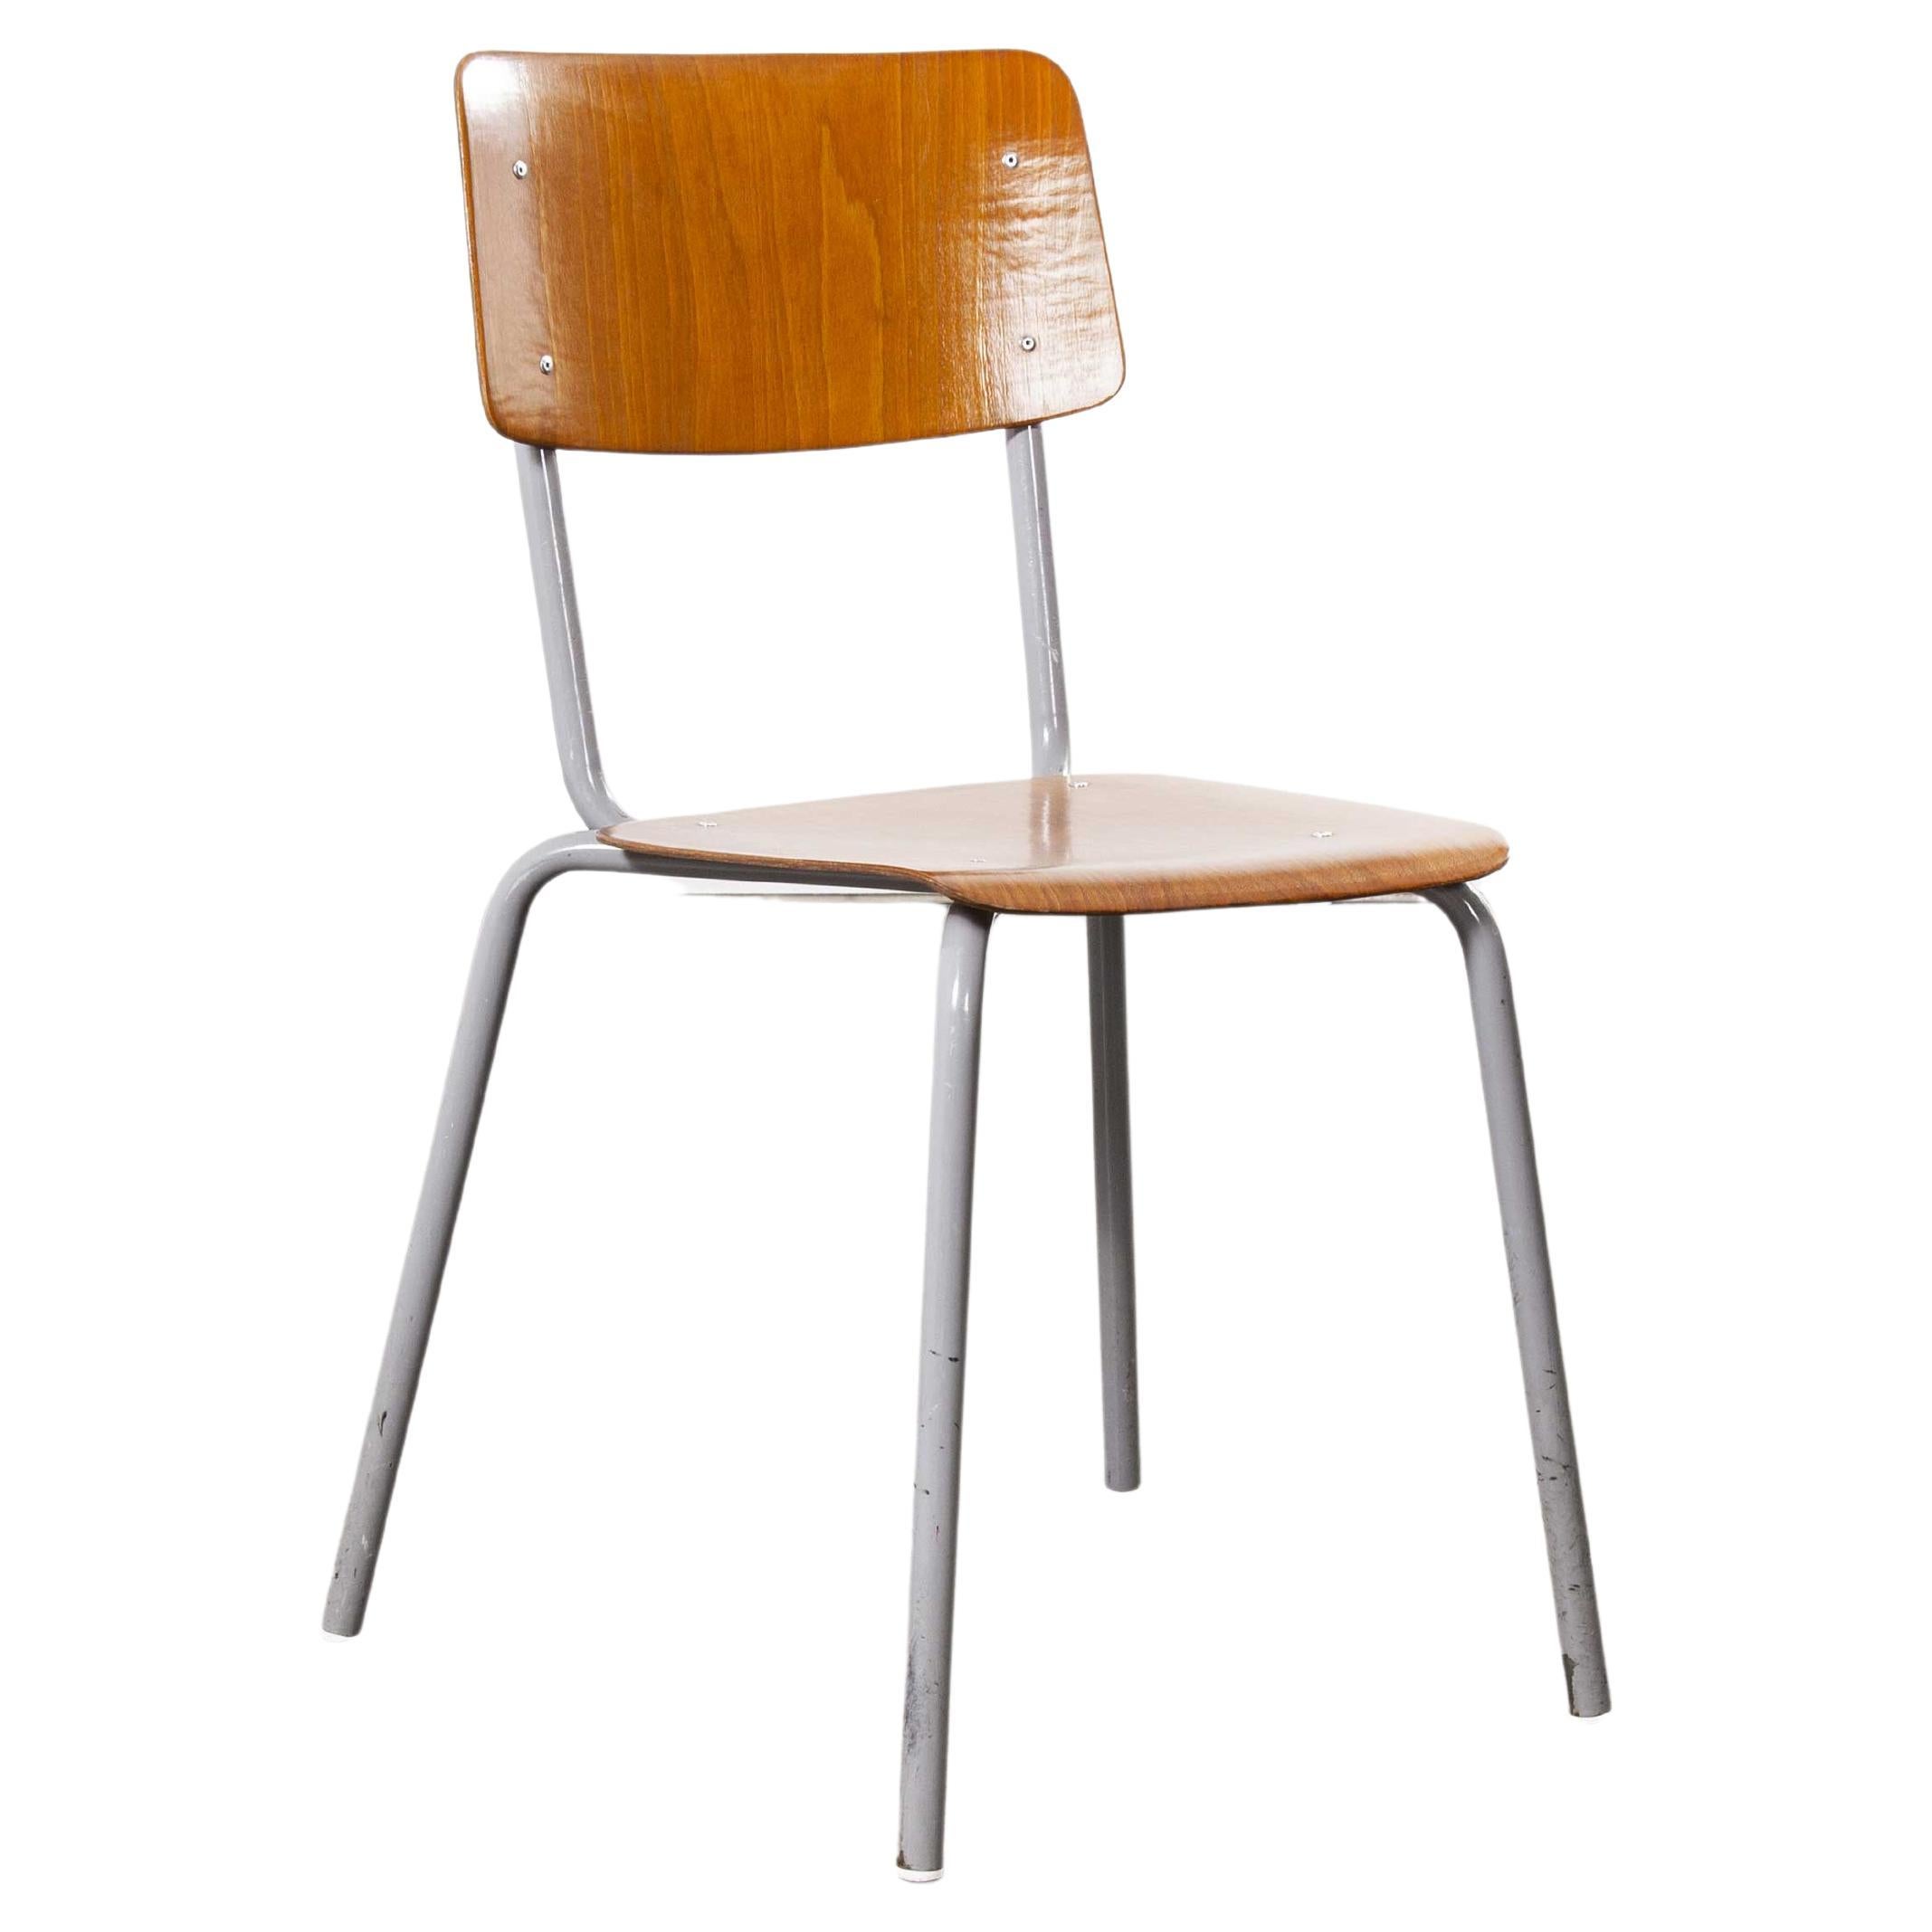 1960's Berl & Cie Mid Century Stacking Chairs - Pagholz - Letzte Restbestände im Angebot